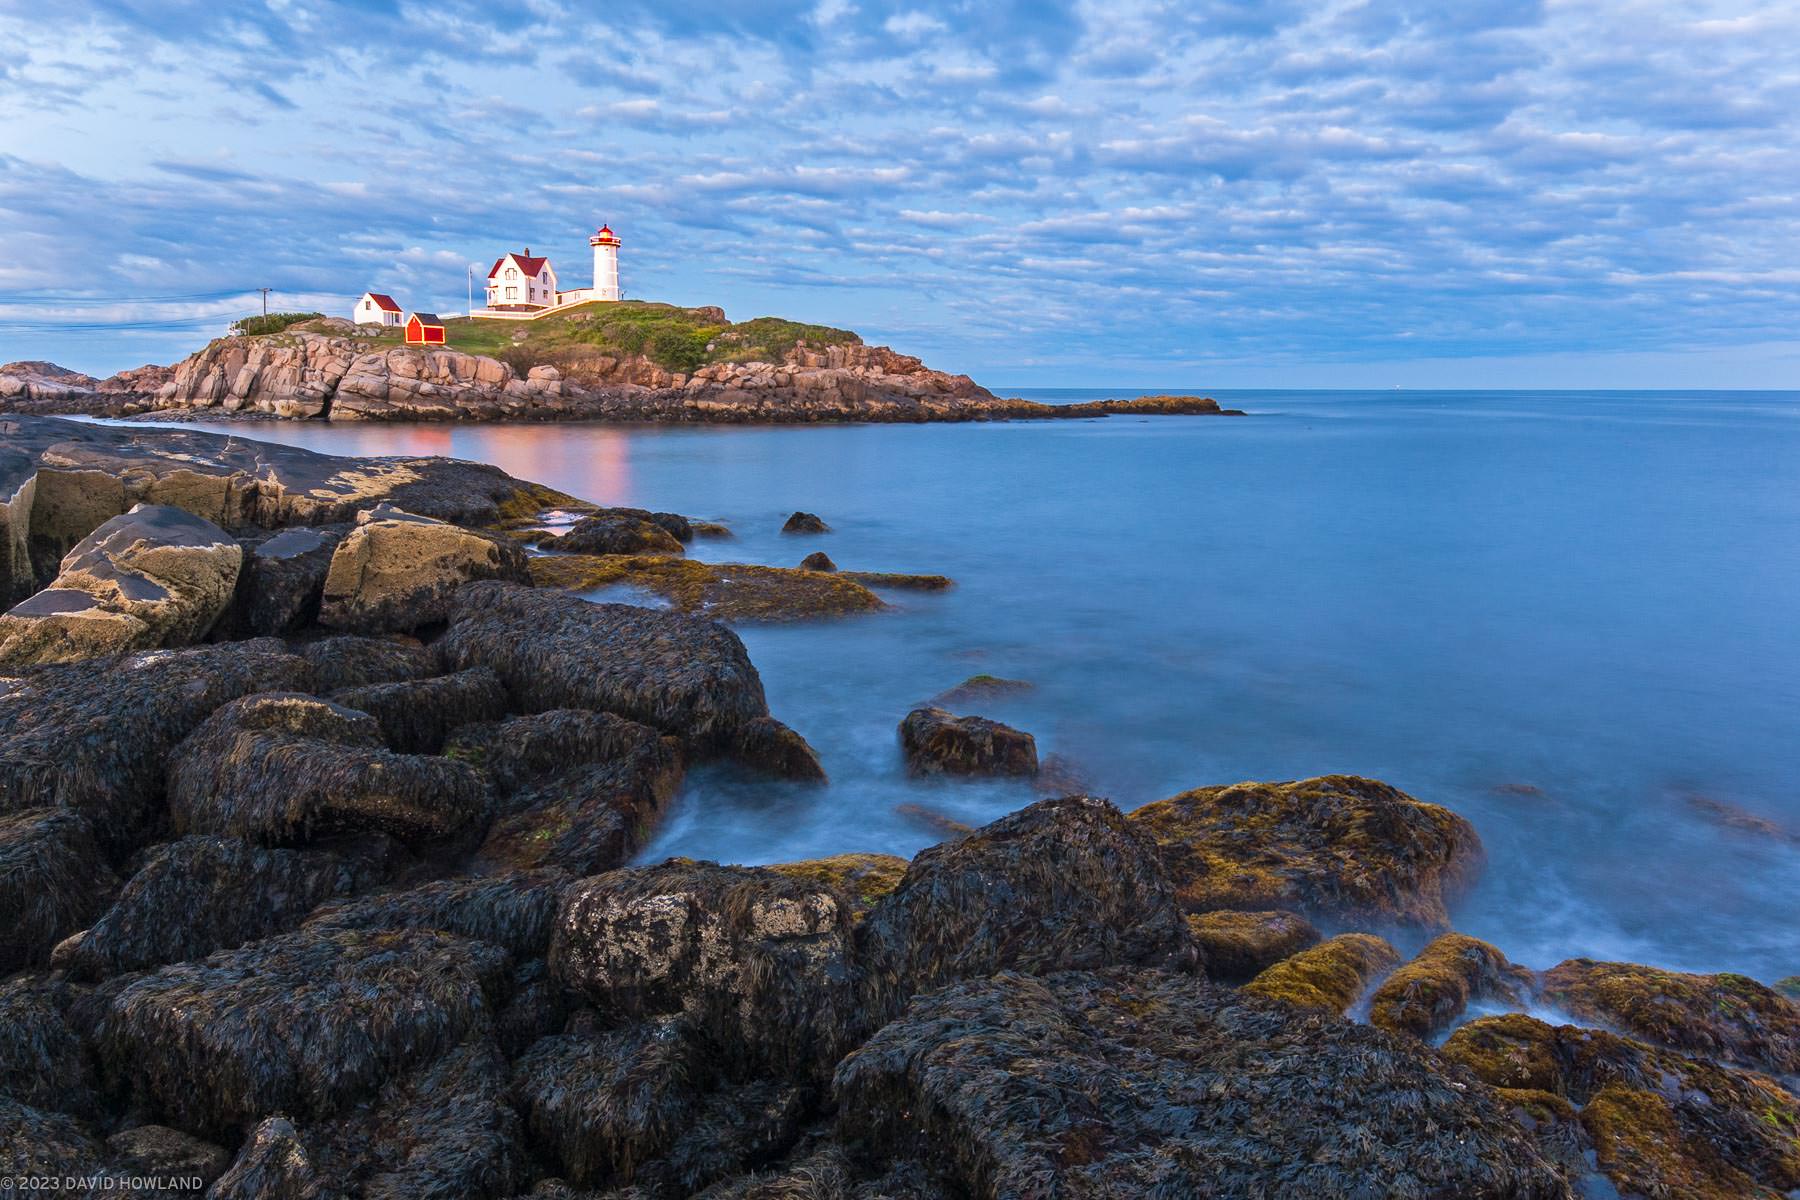 A photo of seaweed covered rocks on the coast of Maine with Nubble Lighthouse in the background.